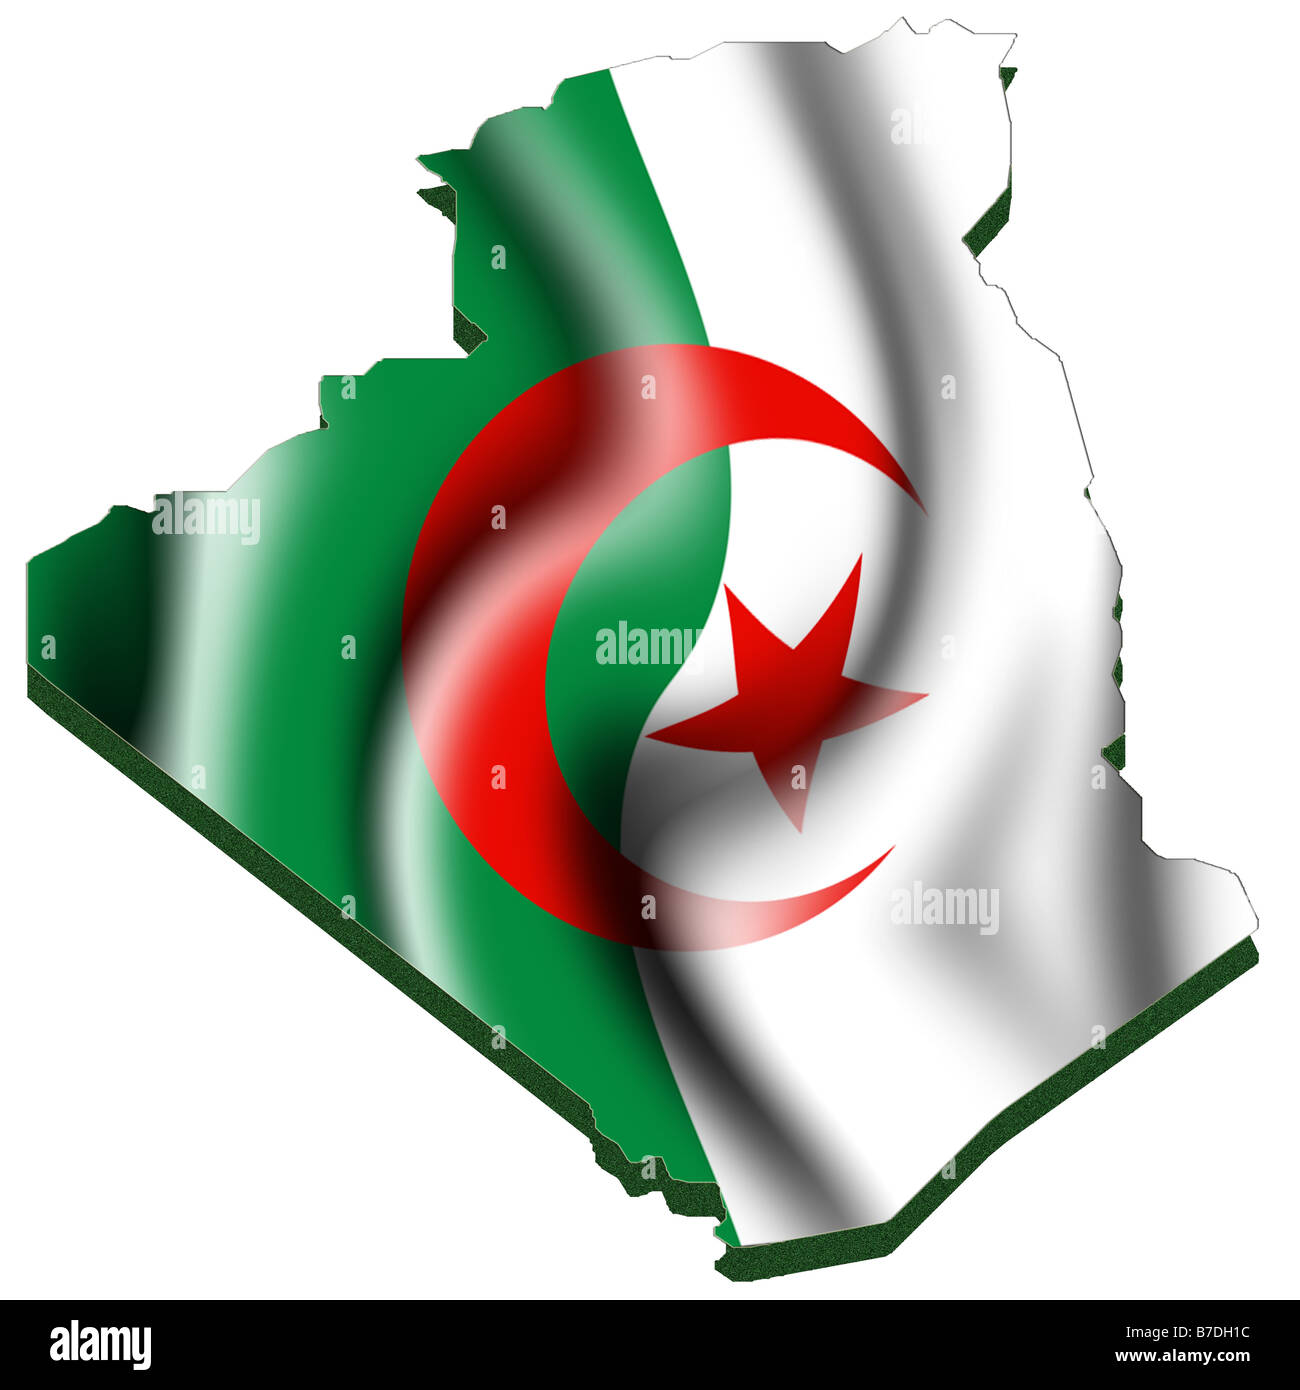 Outline map and flag of Algeria Stock Photo - Alamy